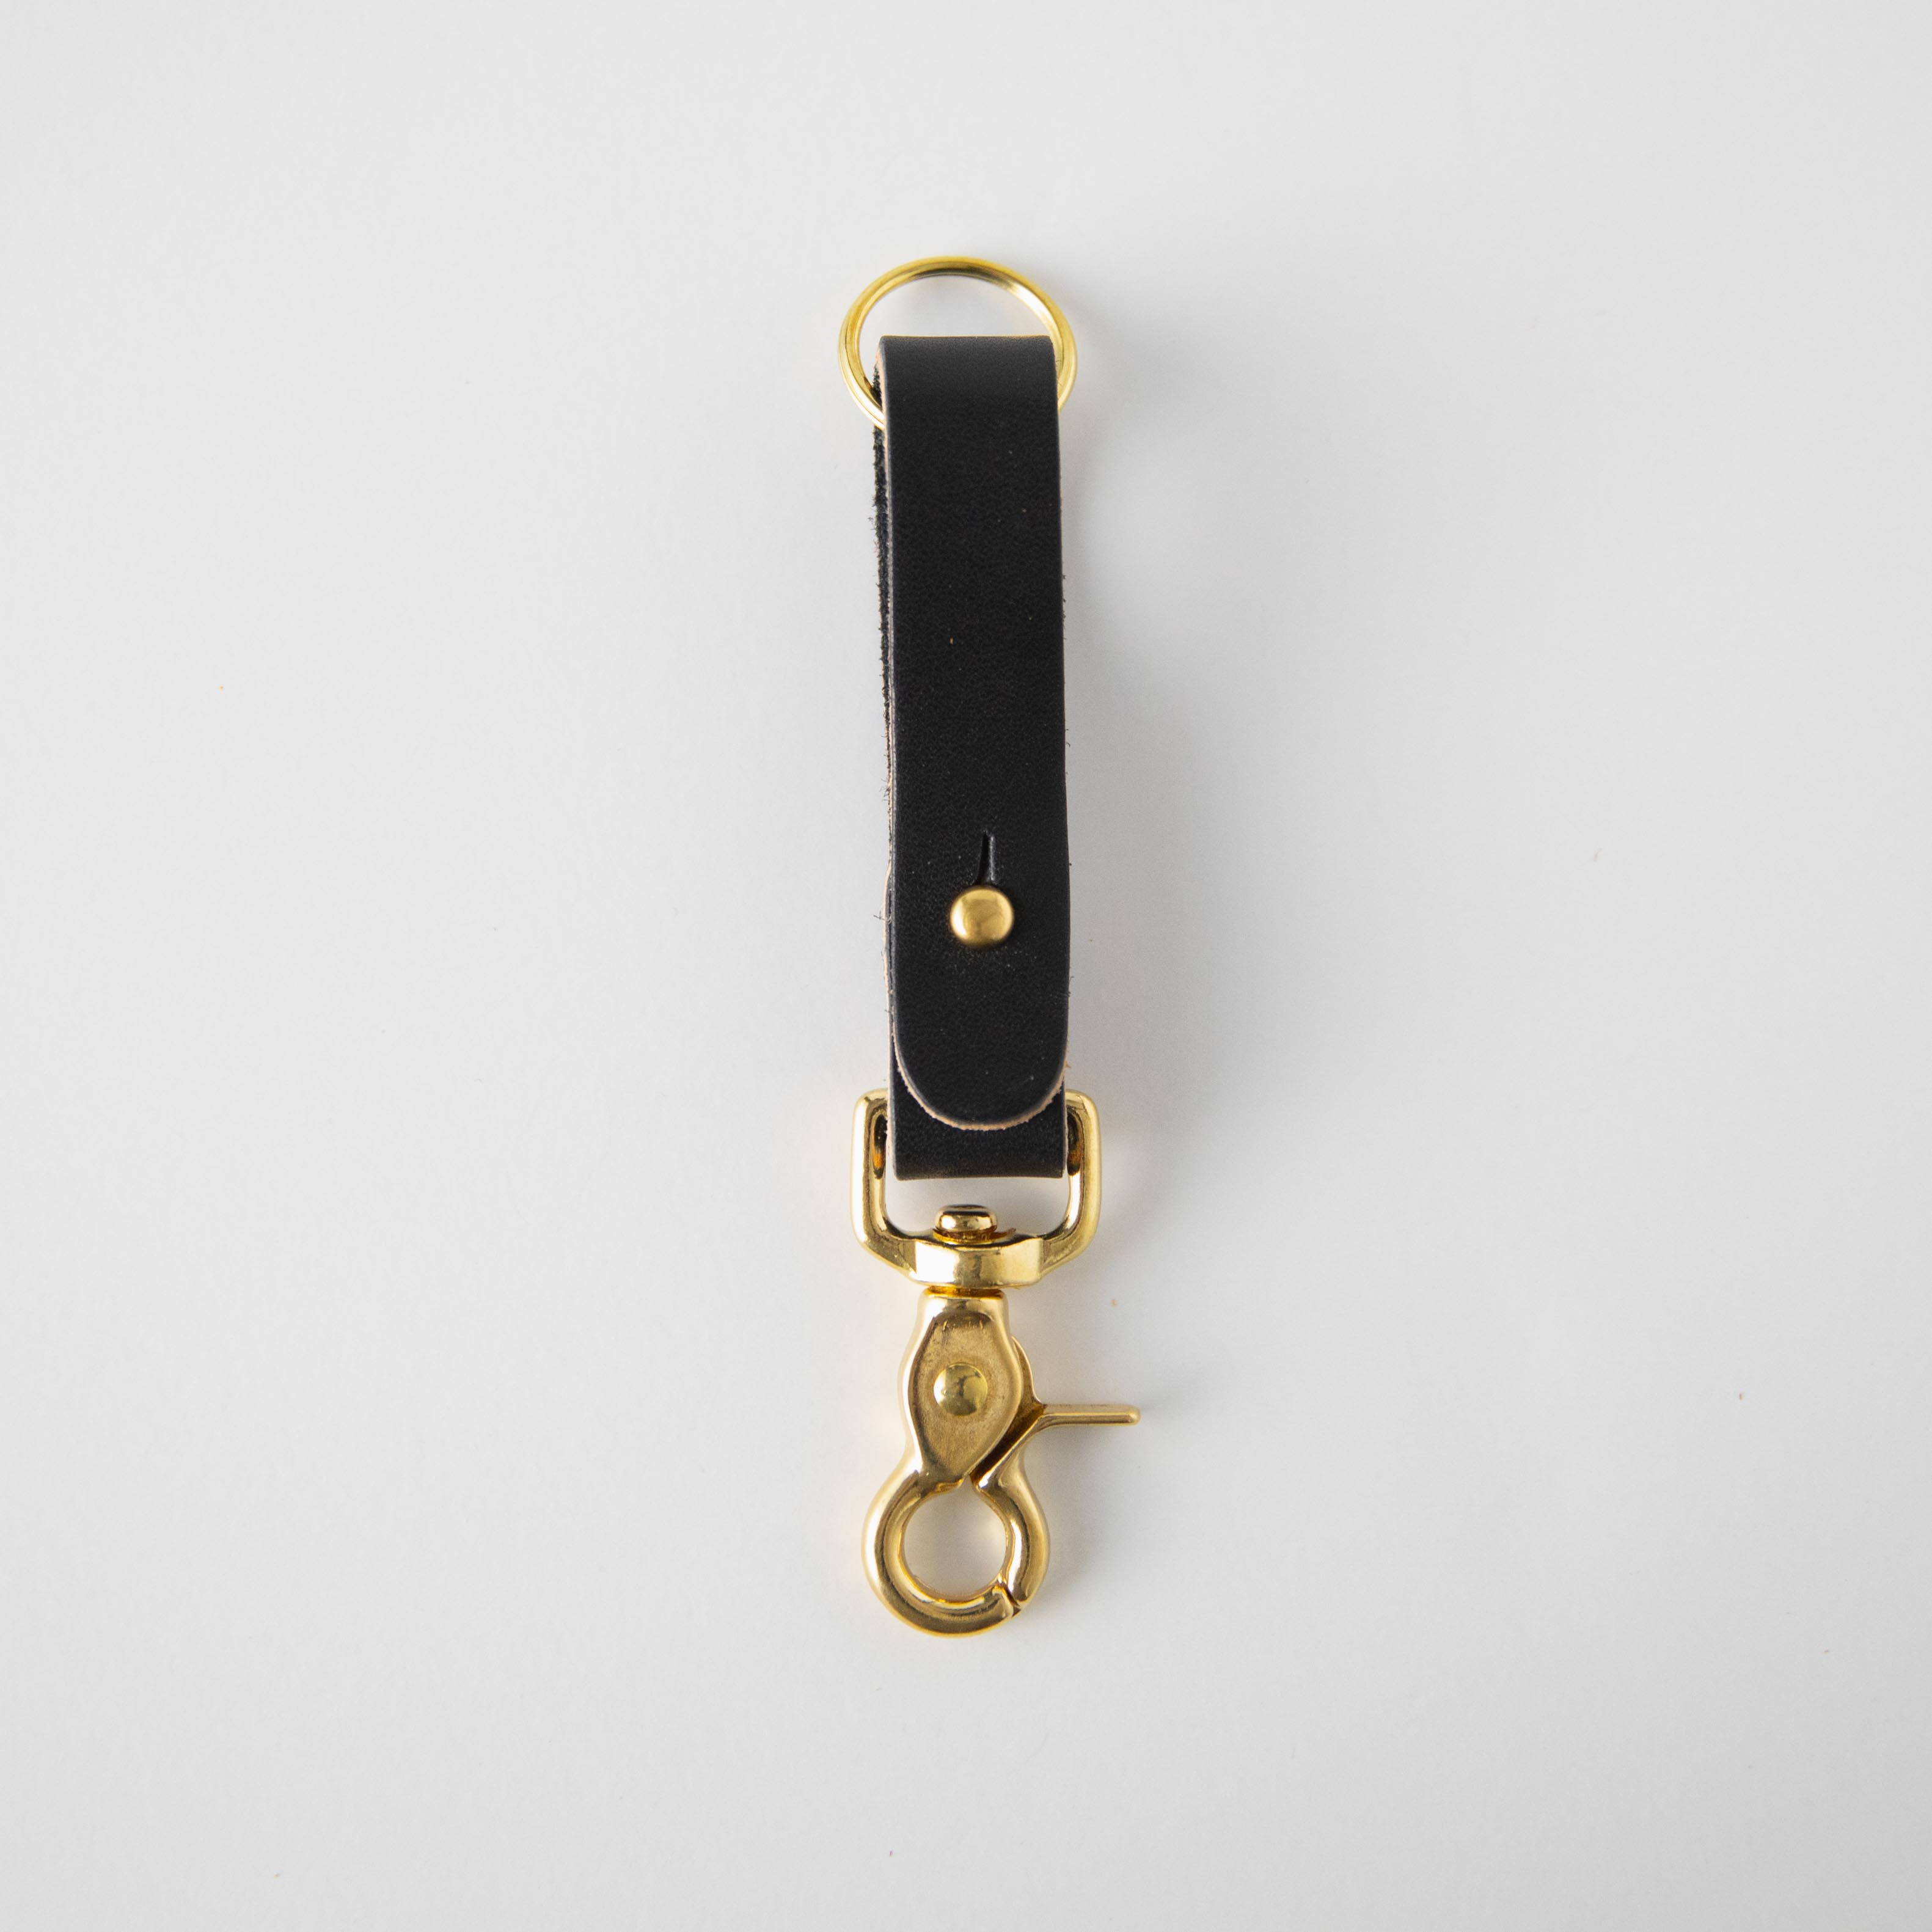 Leather Keychains: Black Key Lanyard | Leather key rings by KMM & Co.